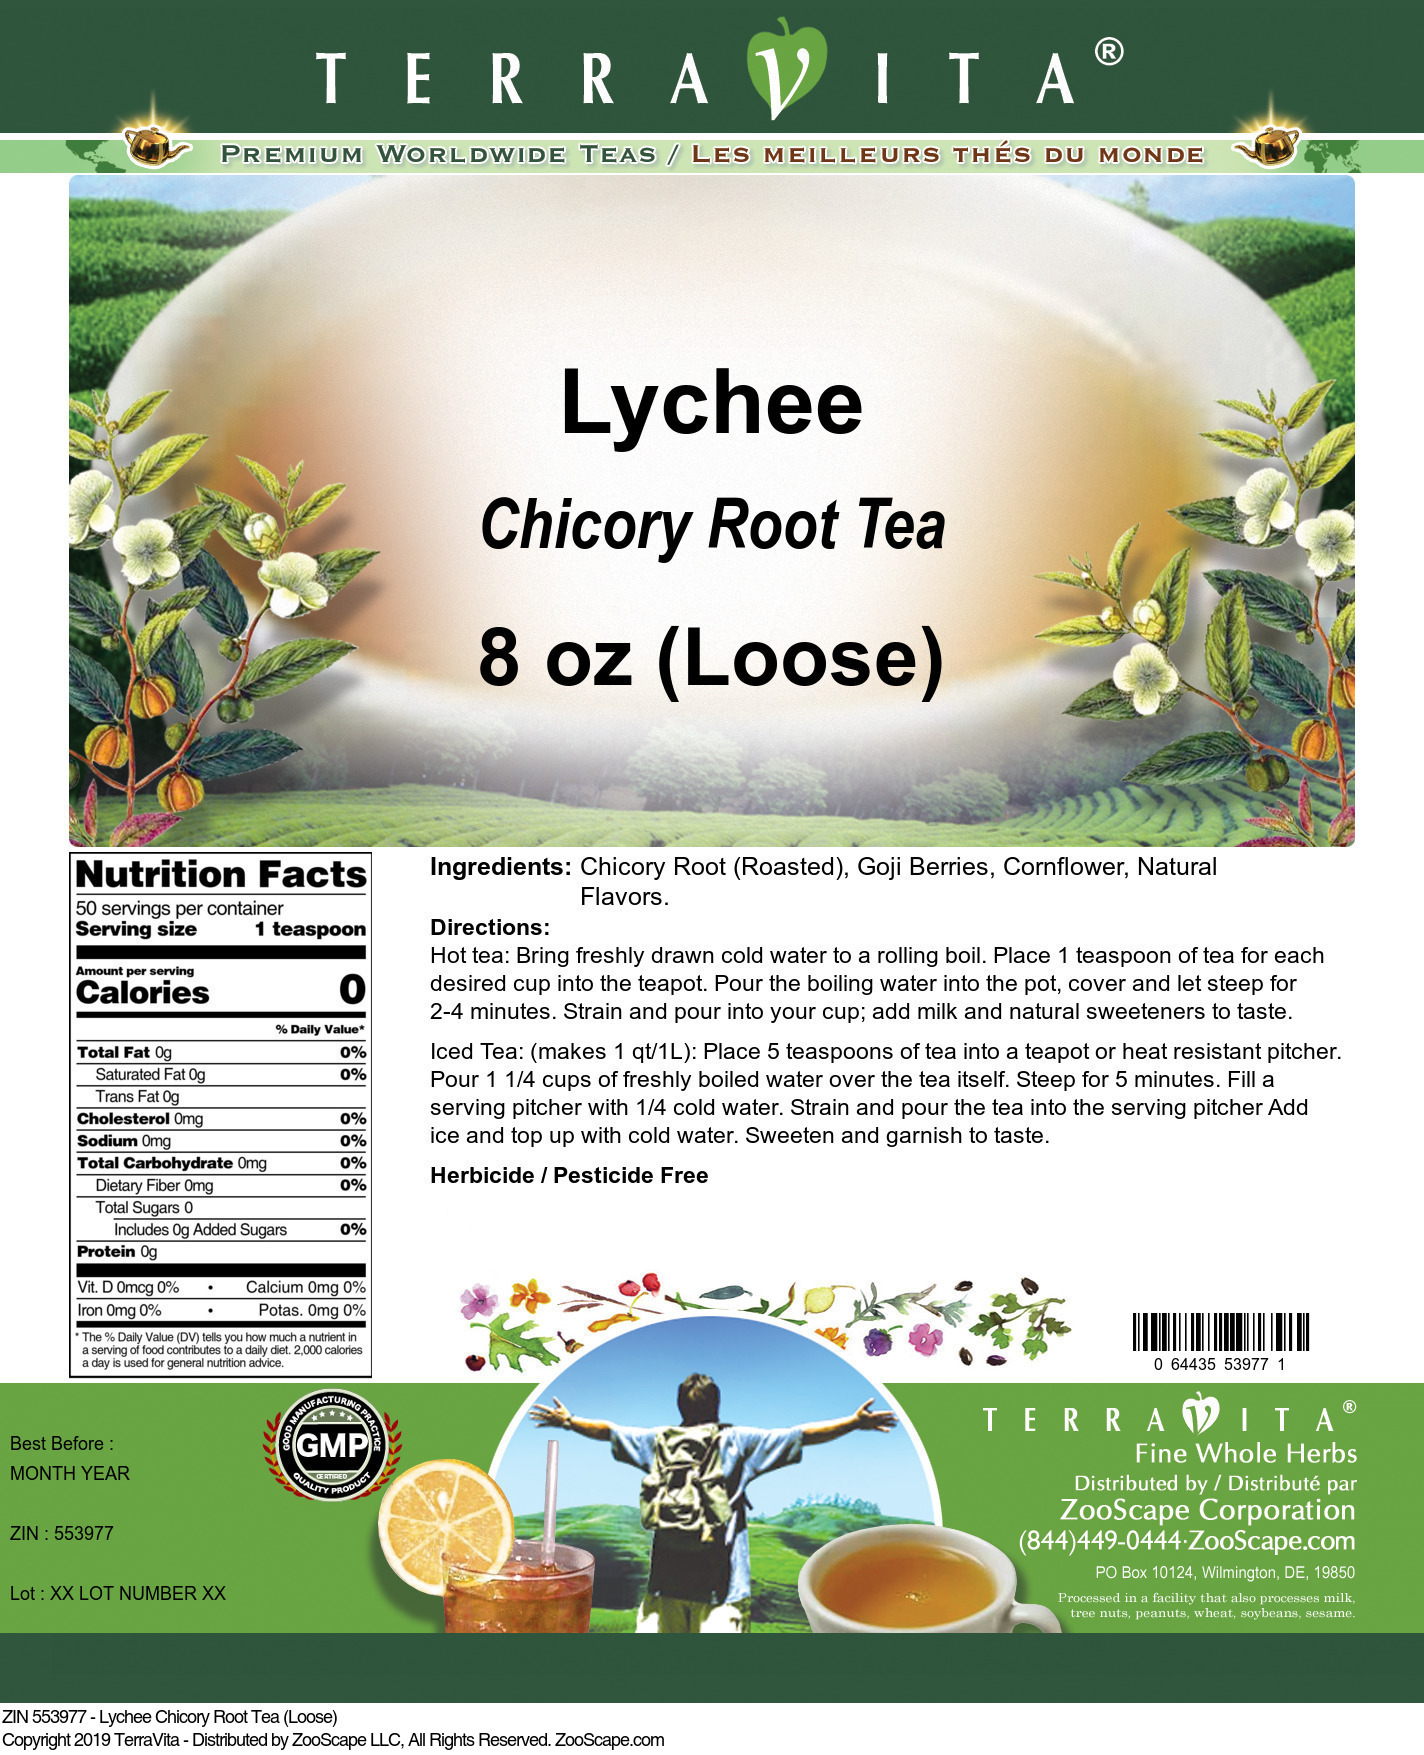 Lychee Chicory Root Tea (Loose) - Label